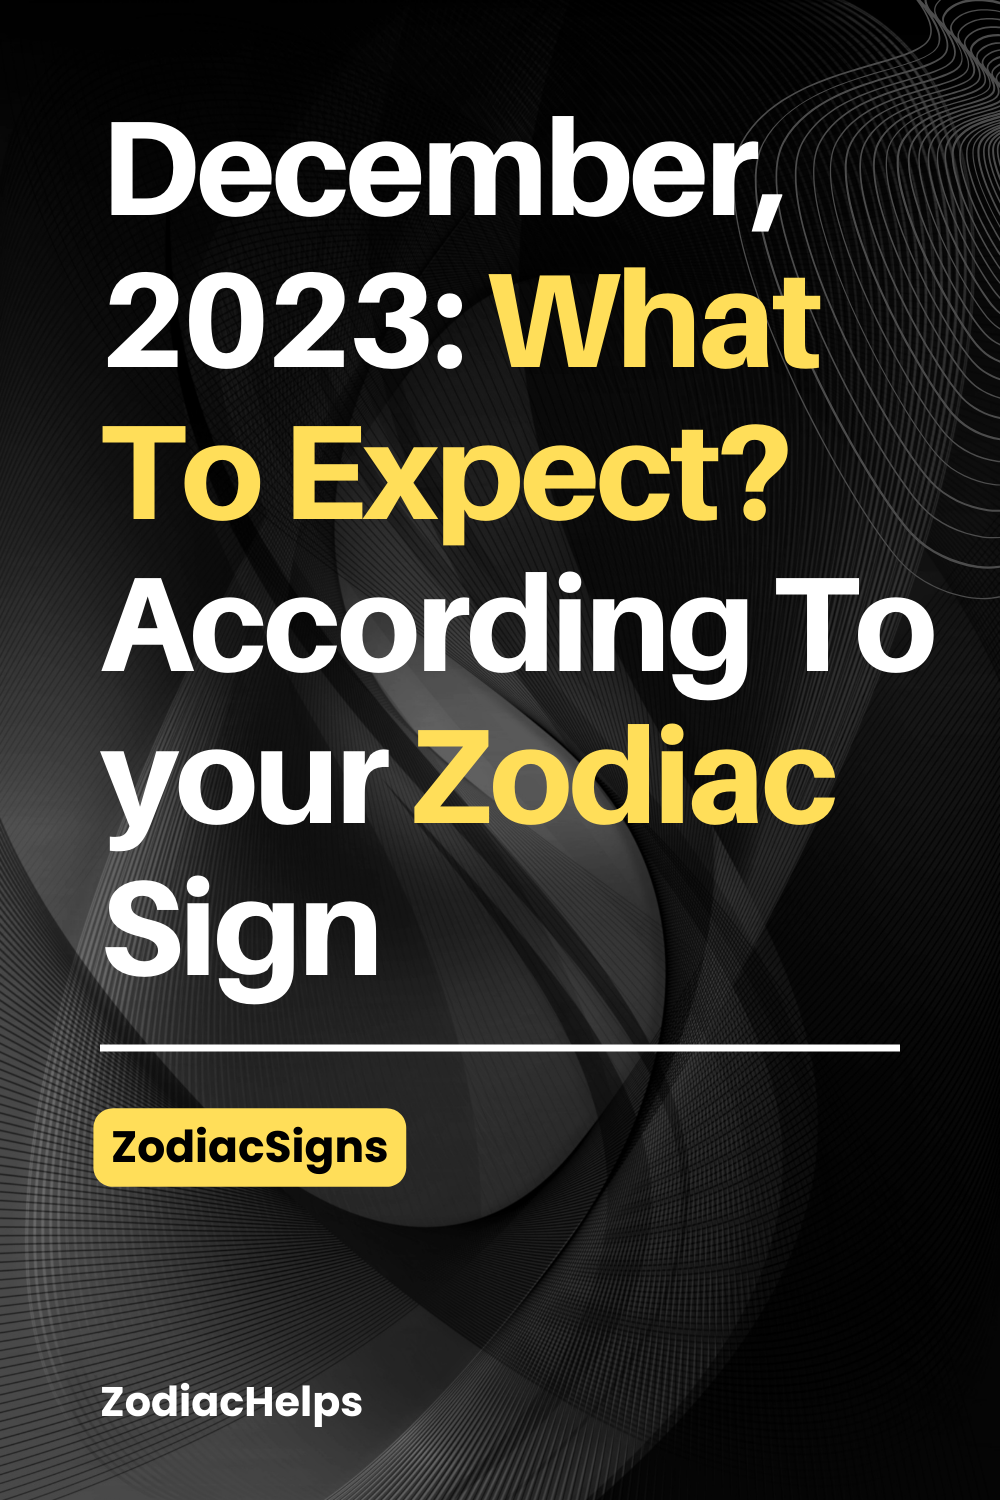 December, 2023 What To Expect According To your Zodiac Sign